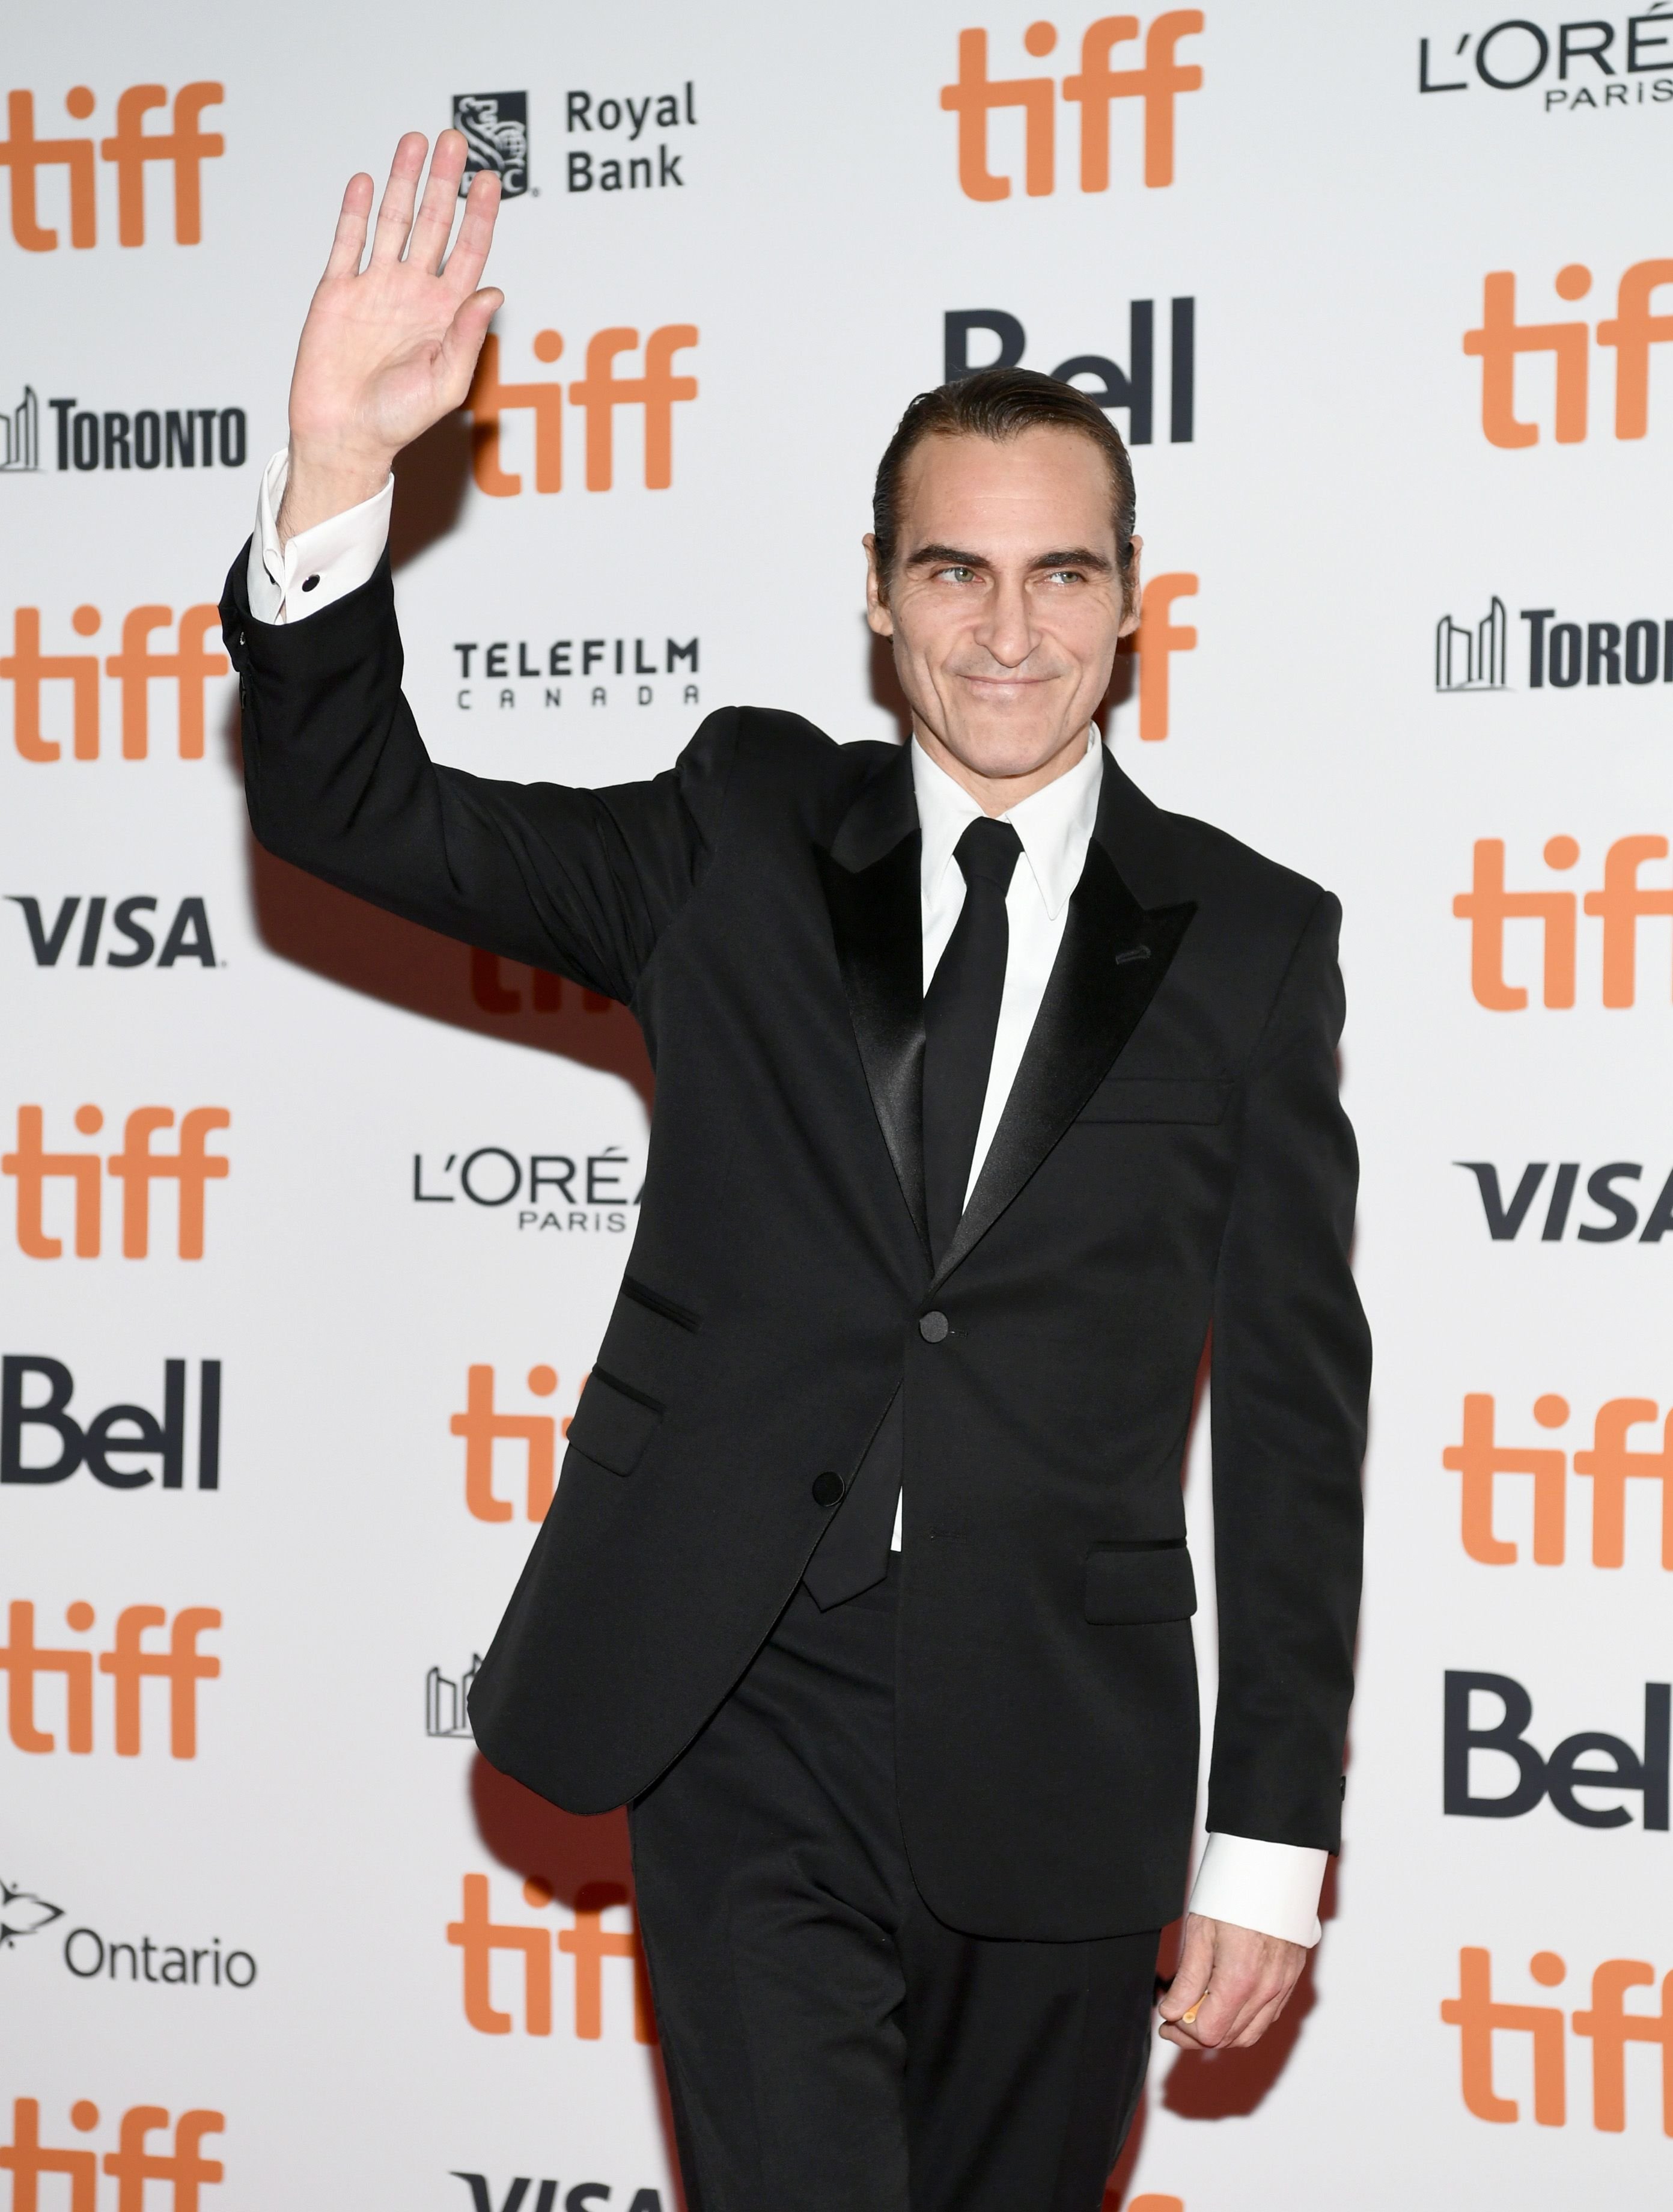 Joaquin Phoenix during the "The brothers sisters" premiere during the 2018 Toronto International Film Festival at Princess of Wales Theater on September 8, 2018 in Toronto, Canada.  |  Source: Getty Images